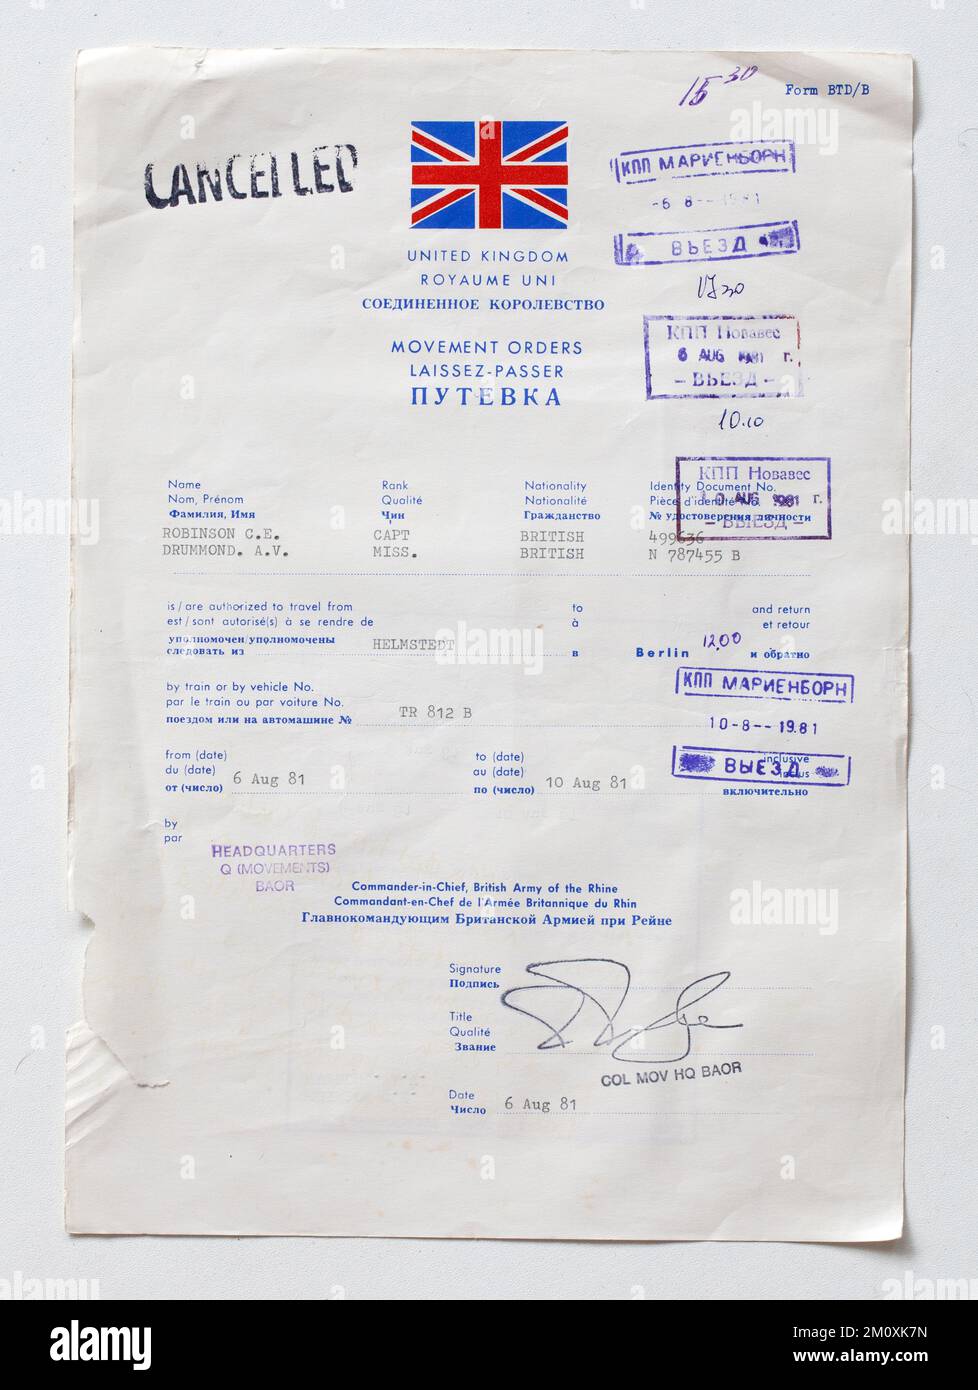 1980s Military British Army Movement Orders Foto Stock